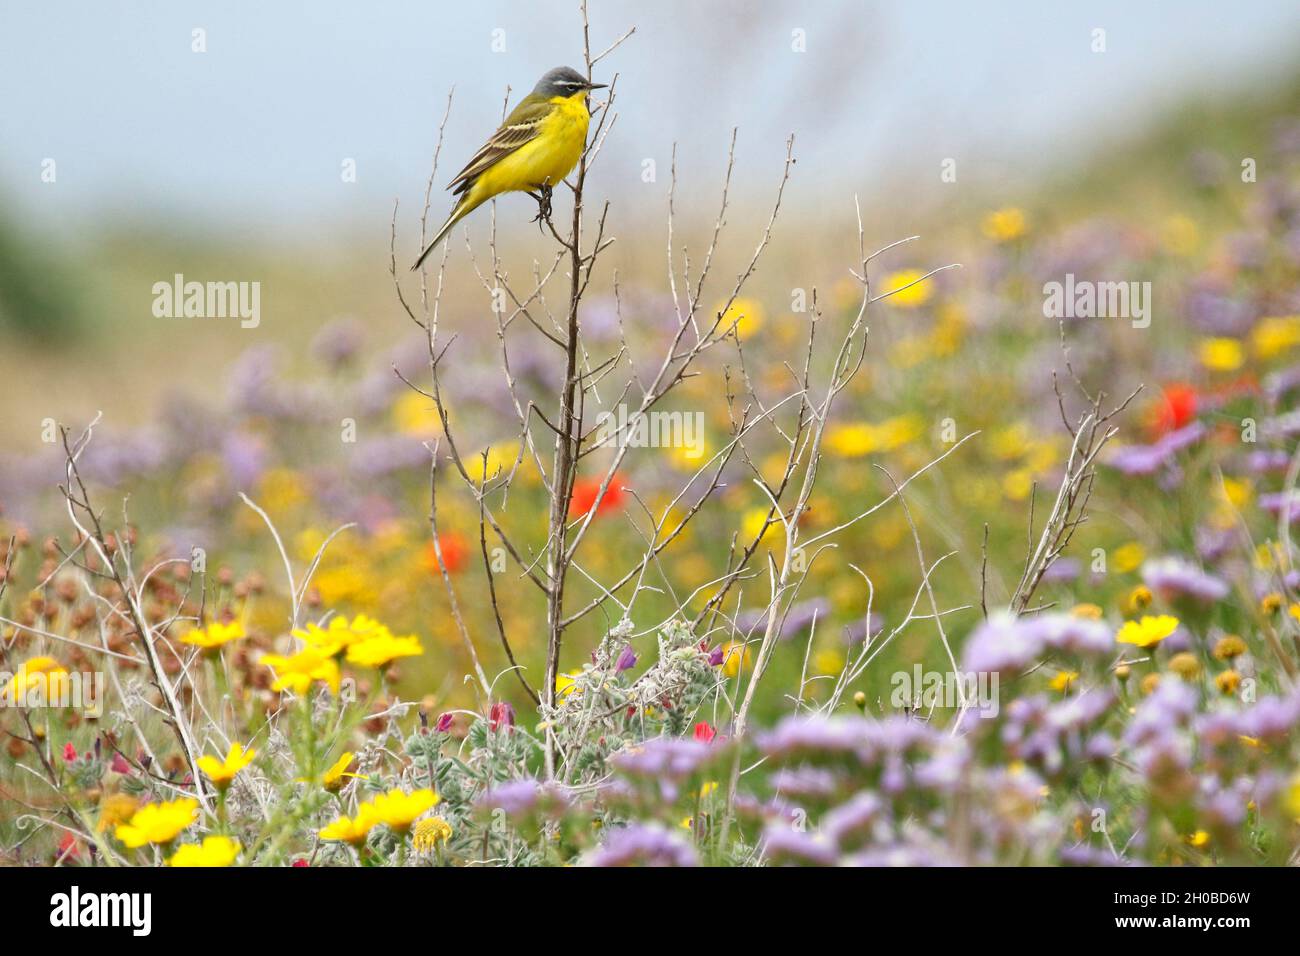 Western Yellow Wagtail (Motacilla flava flava) perched among flowers, Paphos, Cyprus Stock Photo